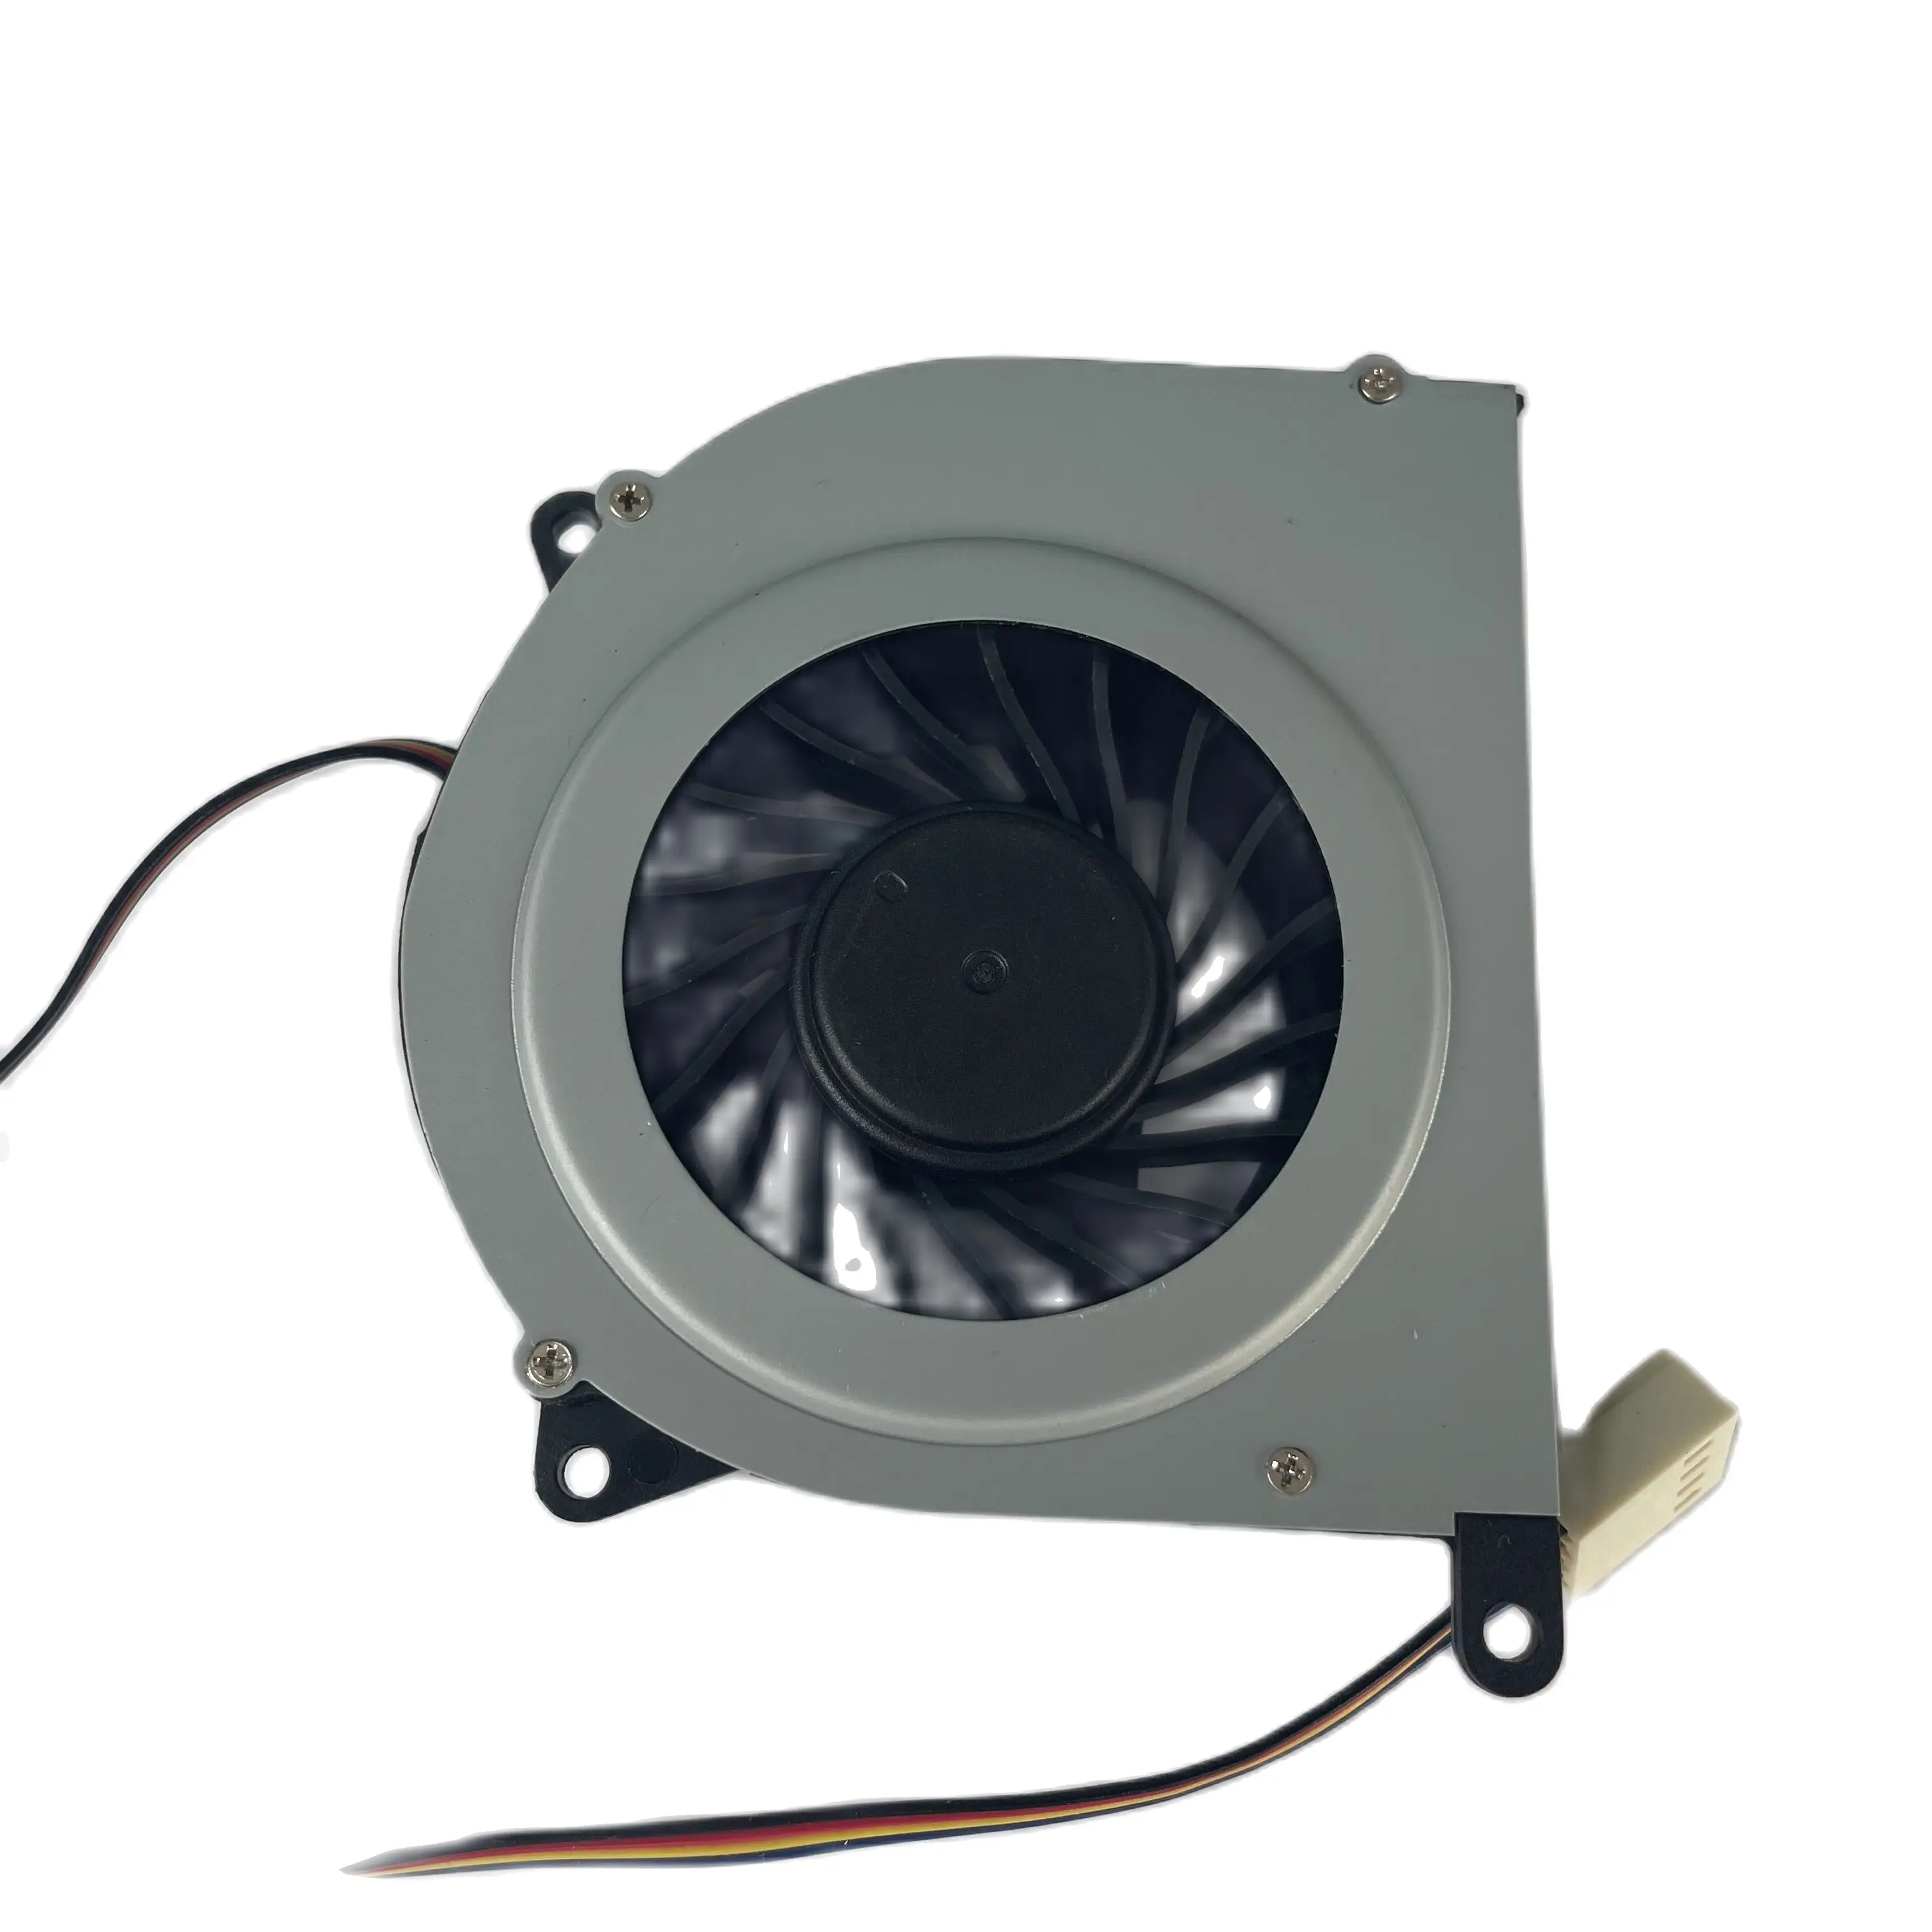 Newest Cooler products sell like hot cakes 7016 Notebook Computer Cooling Fan Heat dissipation artifact images - 6